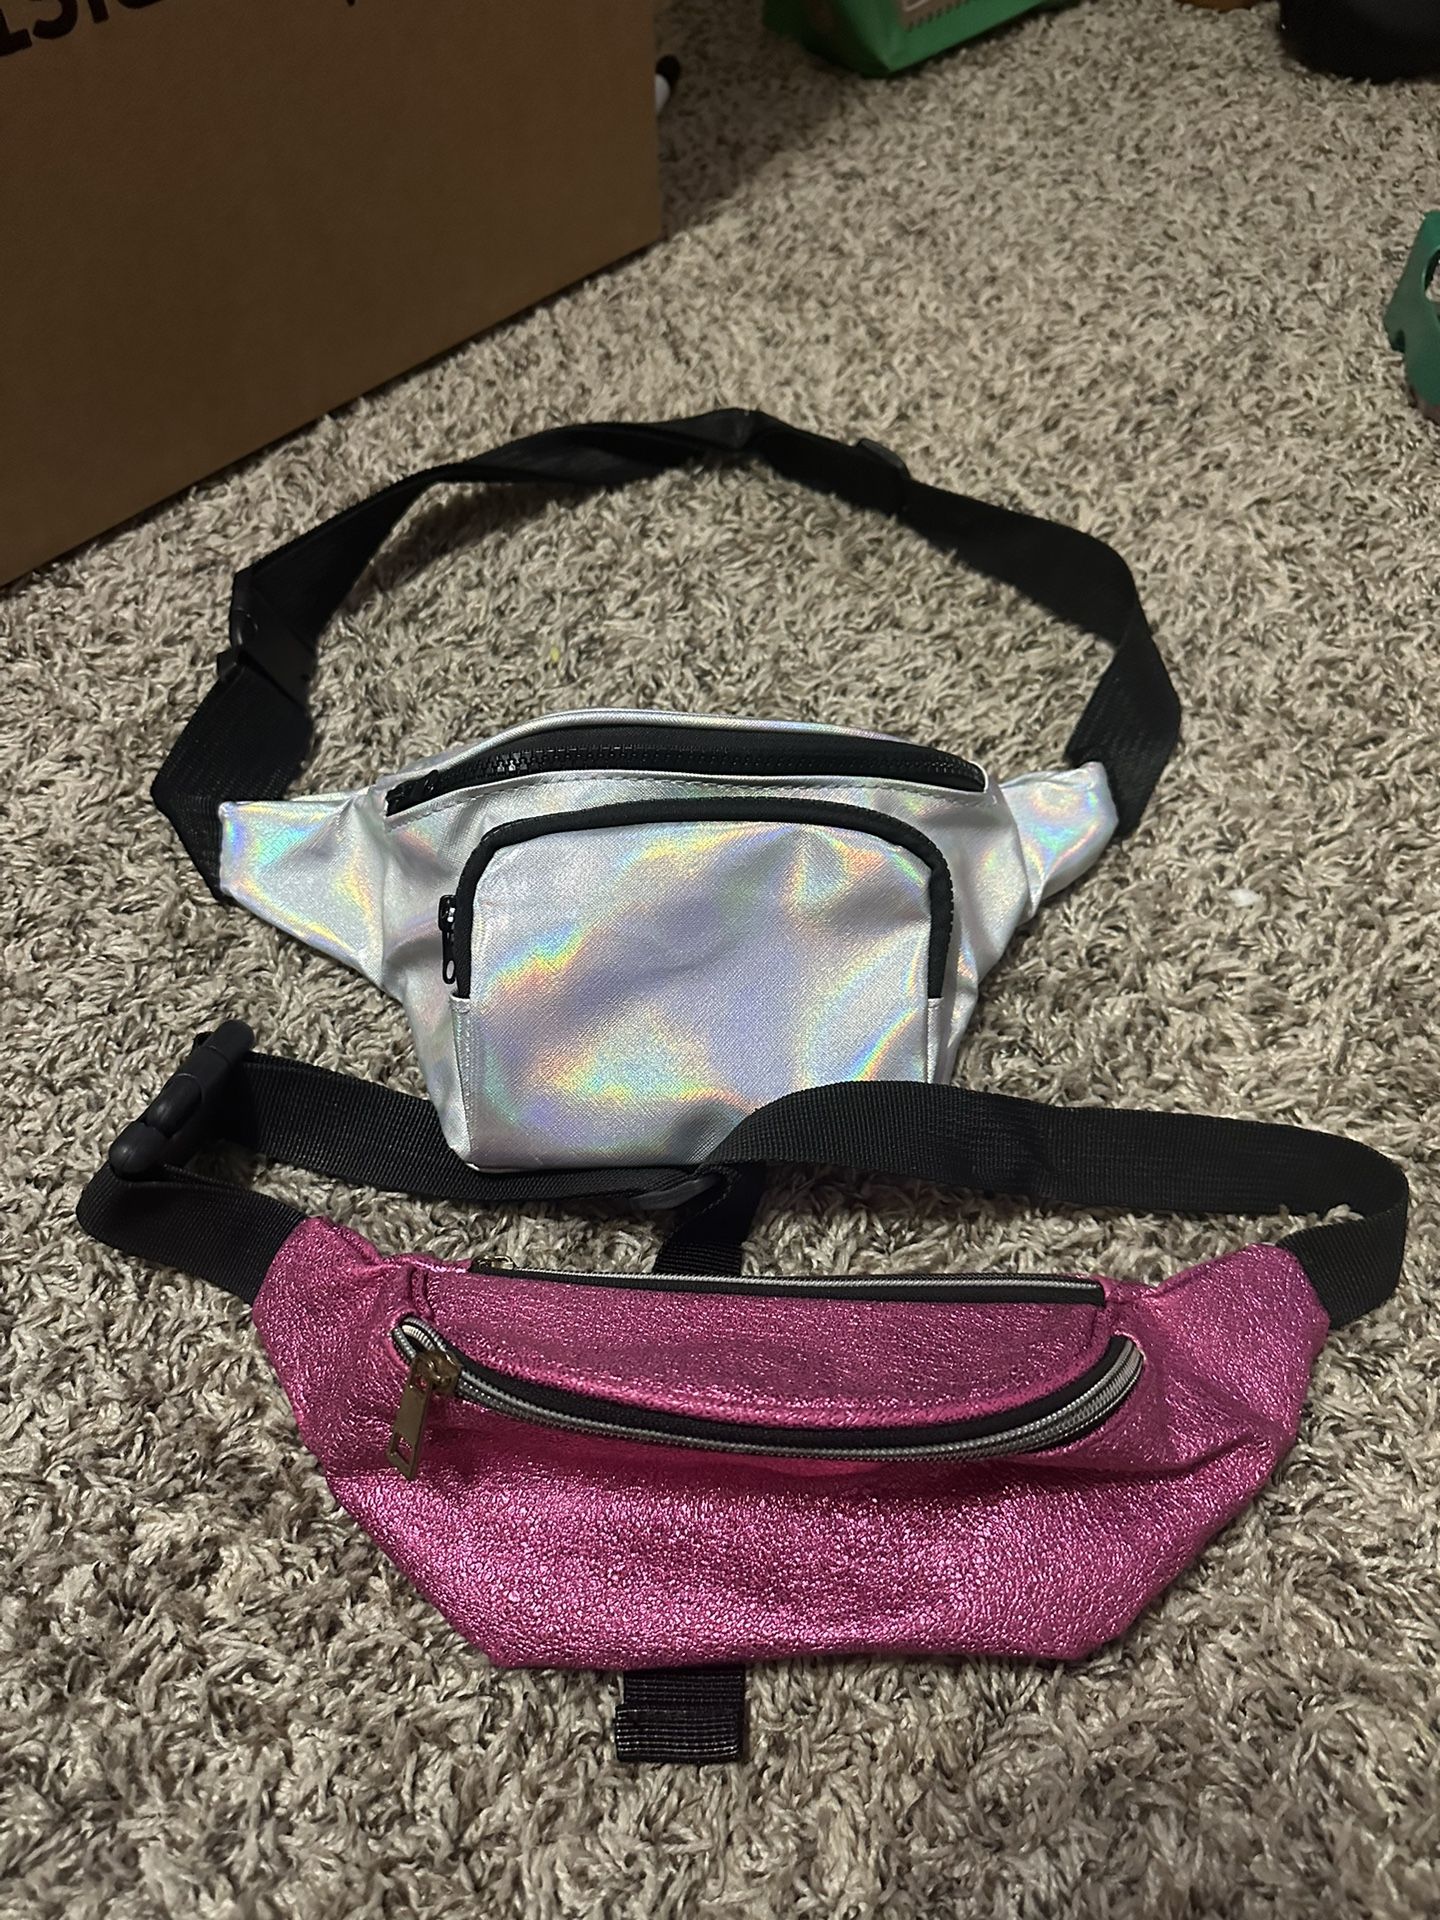 Fanny Pack 